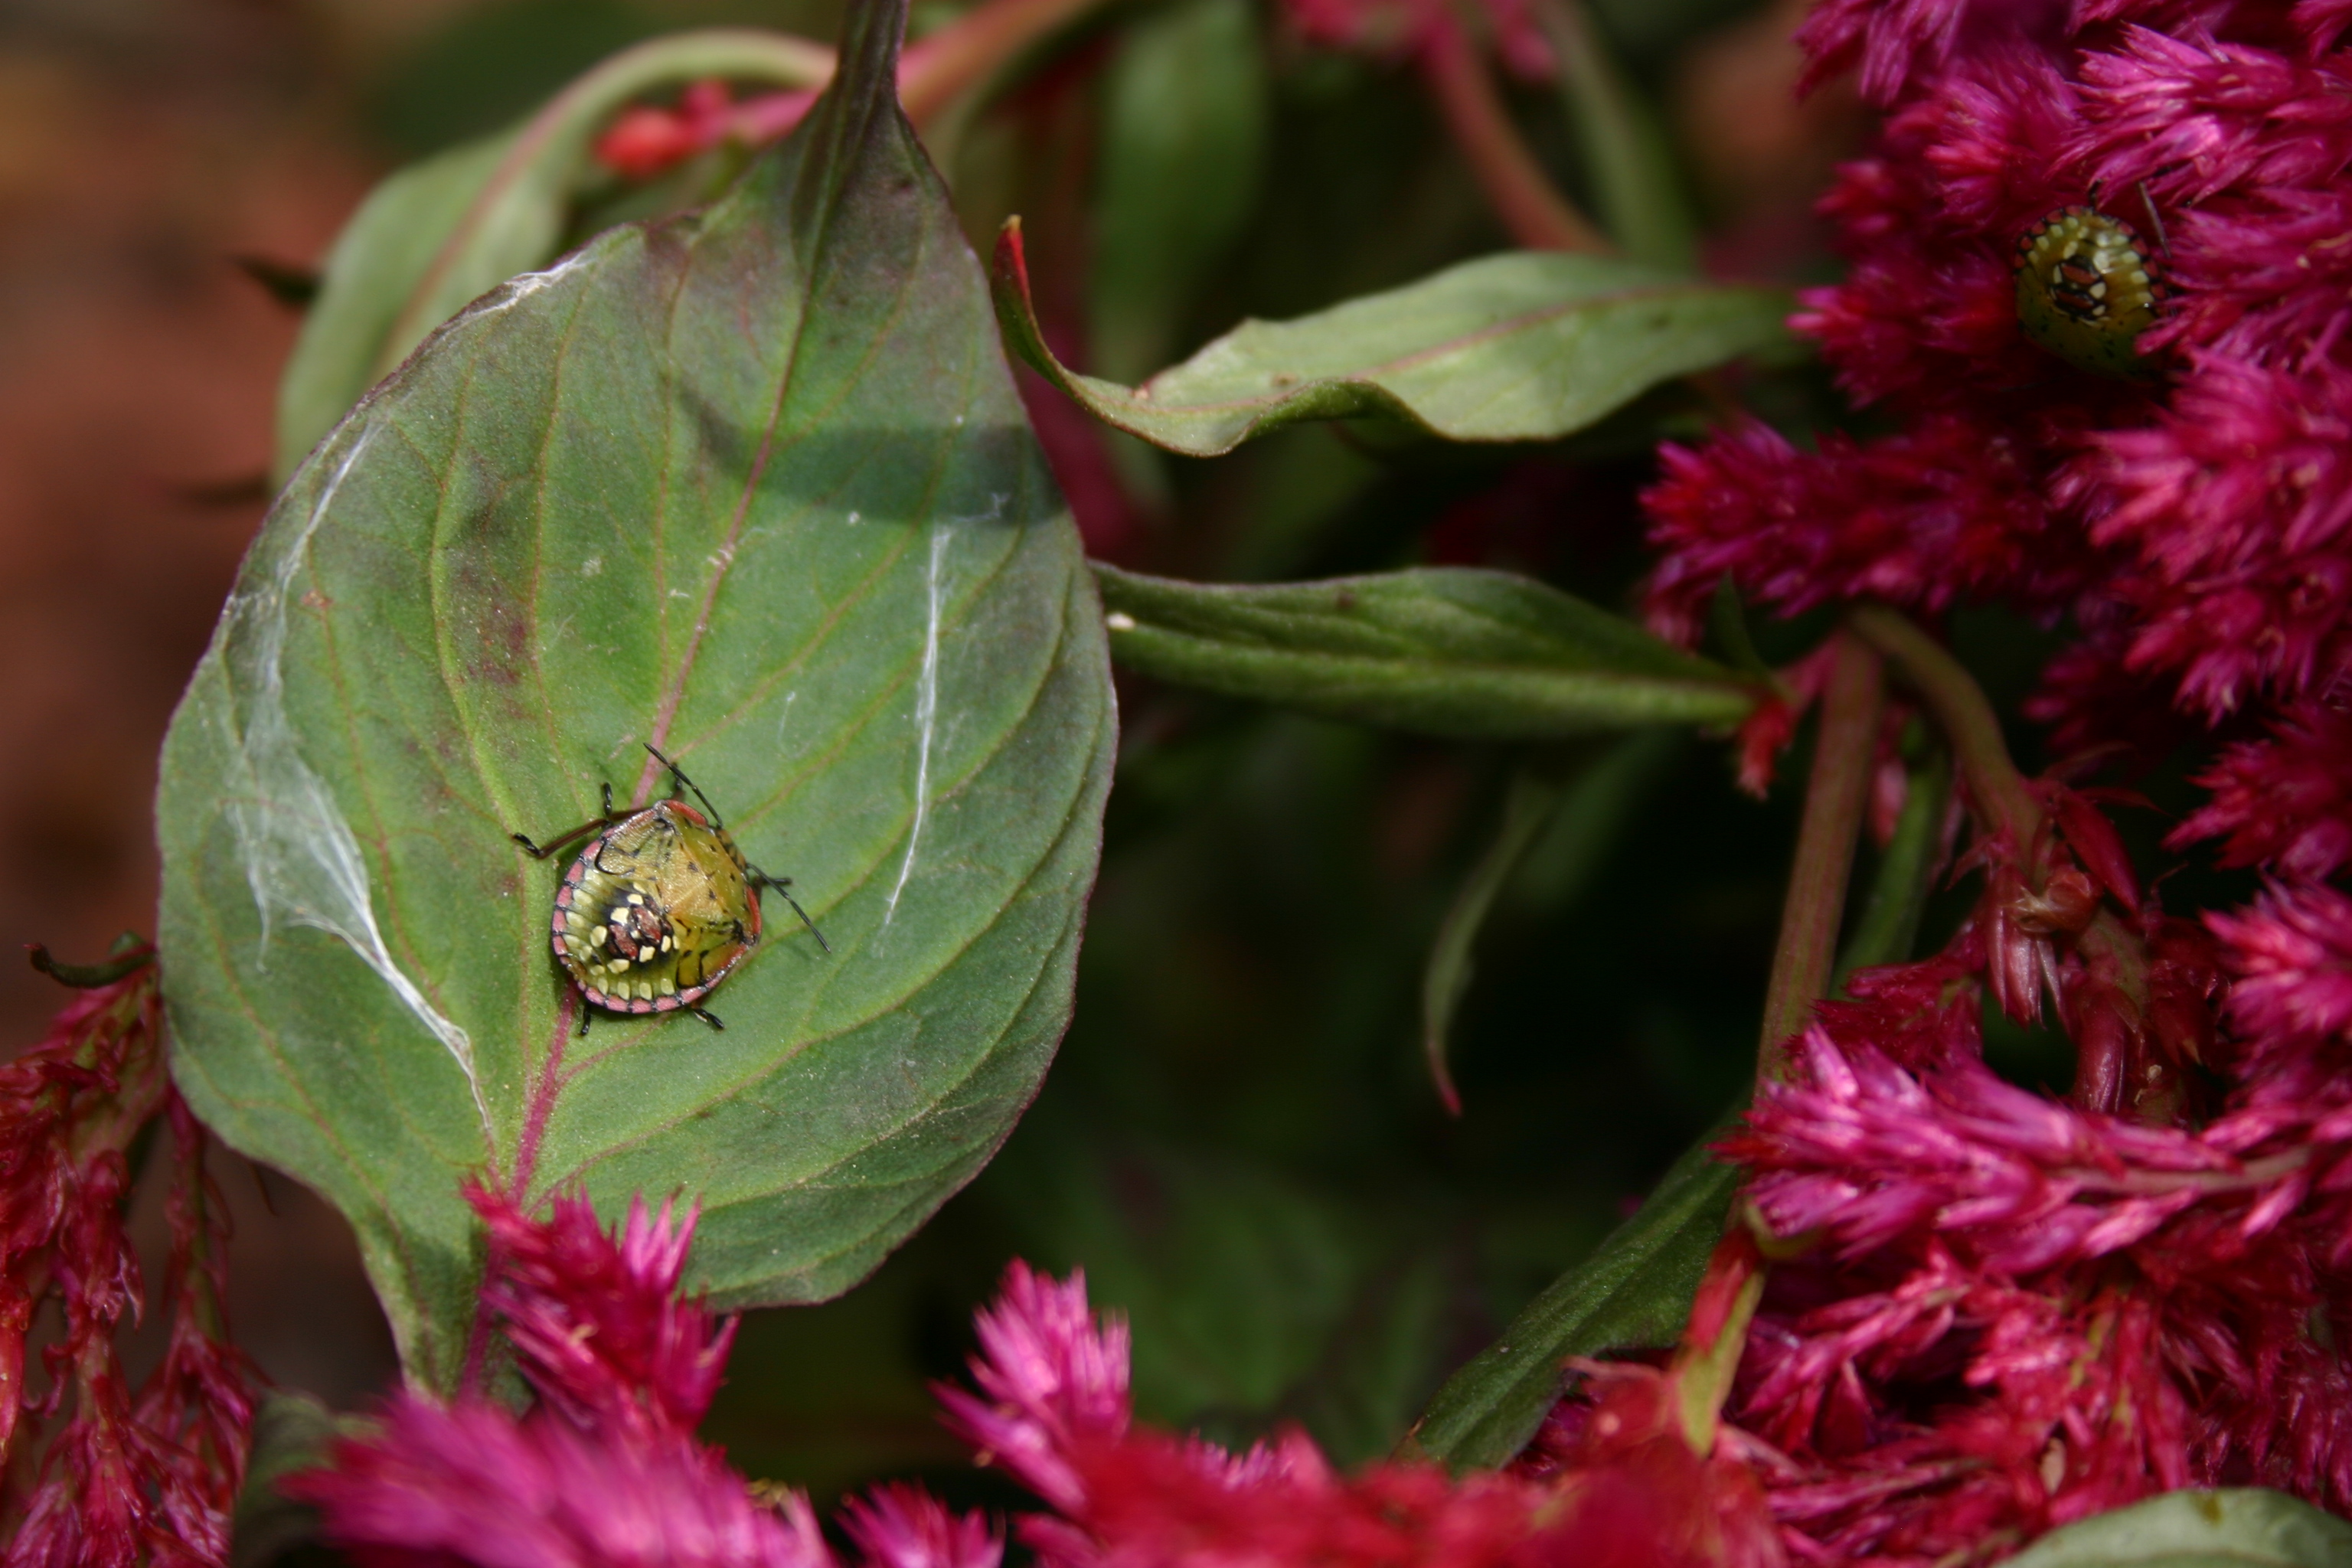 A green, red, and black spotted bug on a Celosia leaf.  (If you know the species, please let me know and I'll add the info!  Maybe some kind of shield beetle?) 